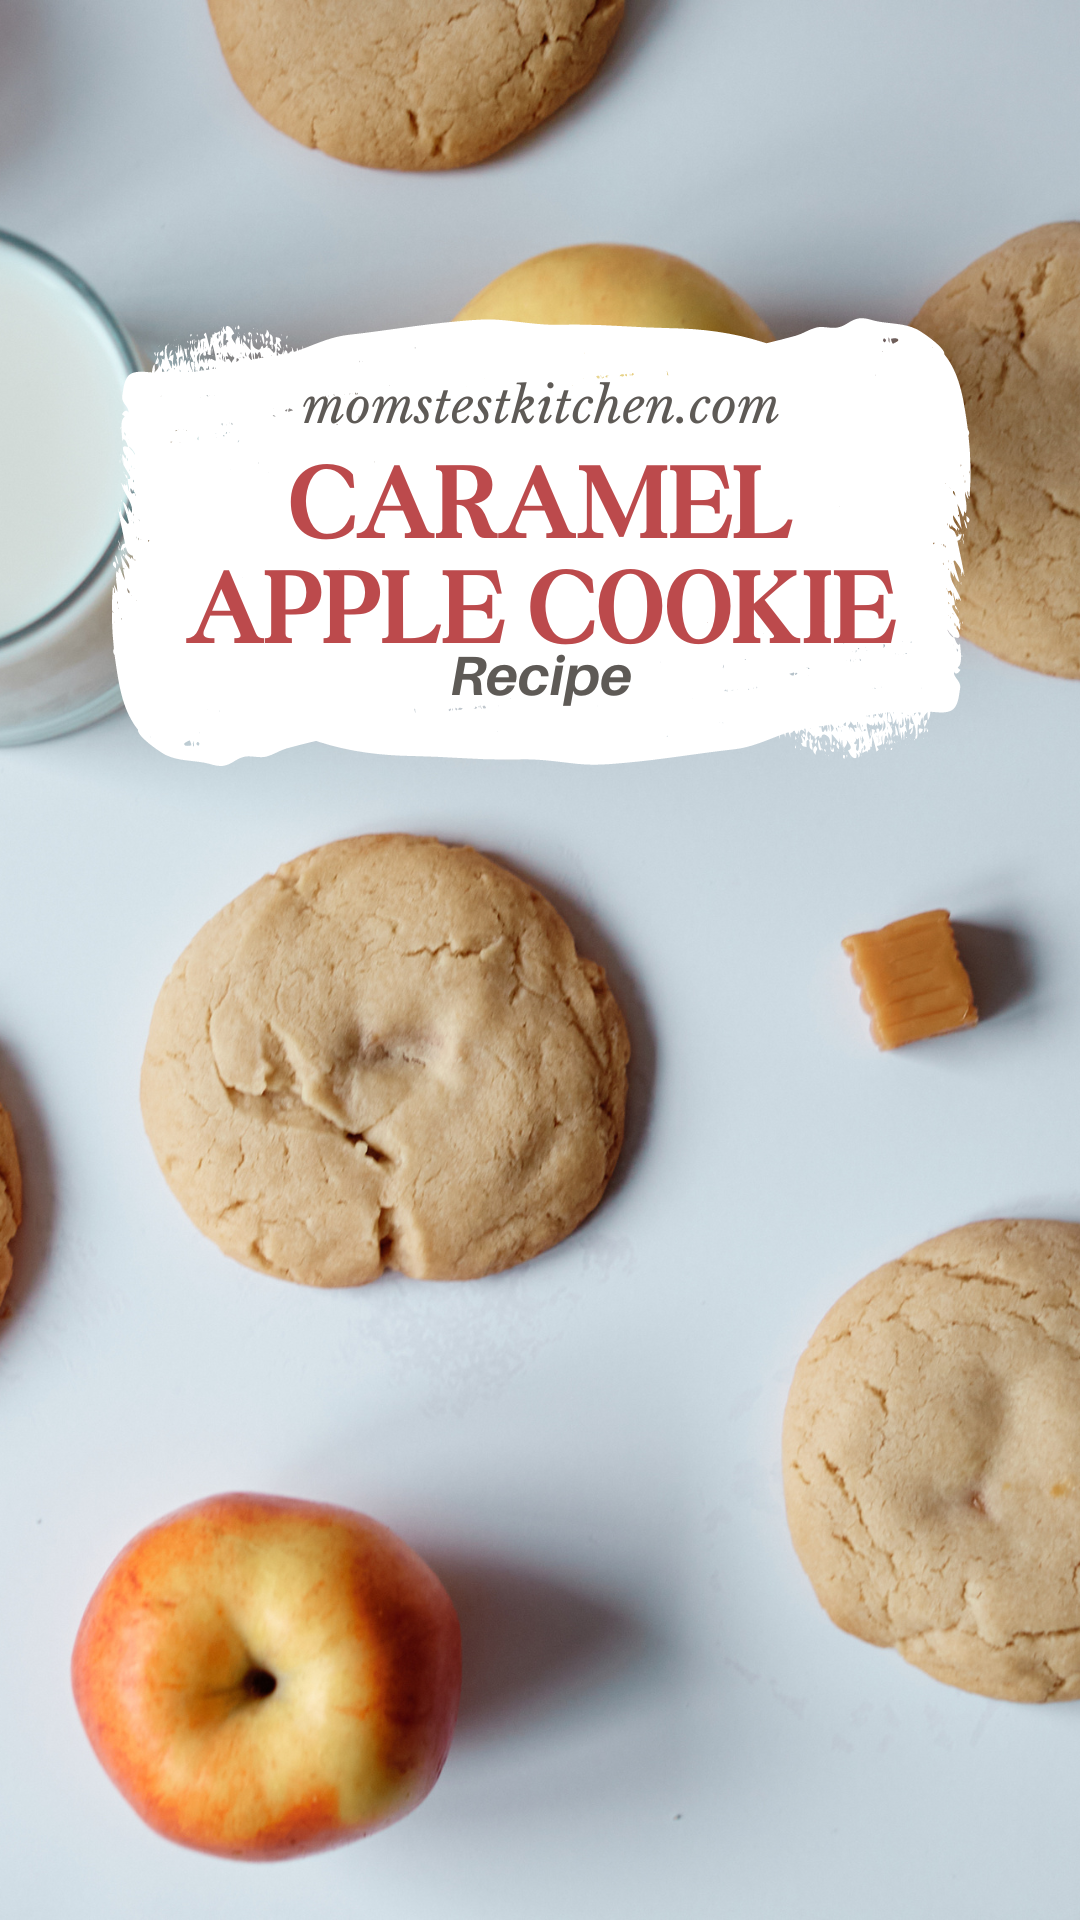 Have you been thinking about heavenly fall desserts lately? These Caramel Apple Cookies are the perfect way to enjoy all of the flavors of fall in one bite! They’re soft, chewy, and full of delicious caramel apple flavor.